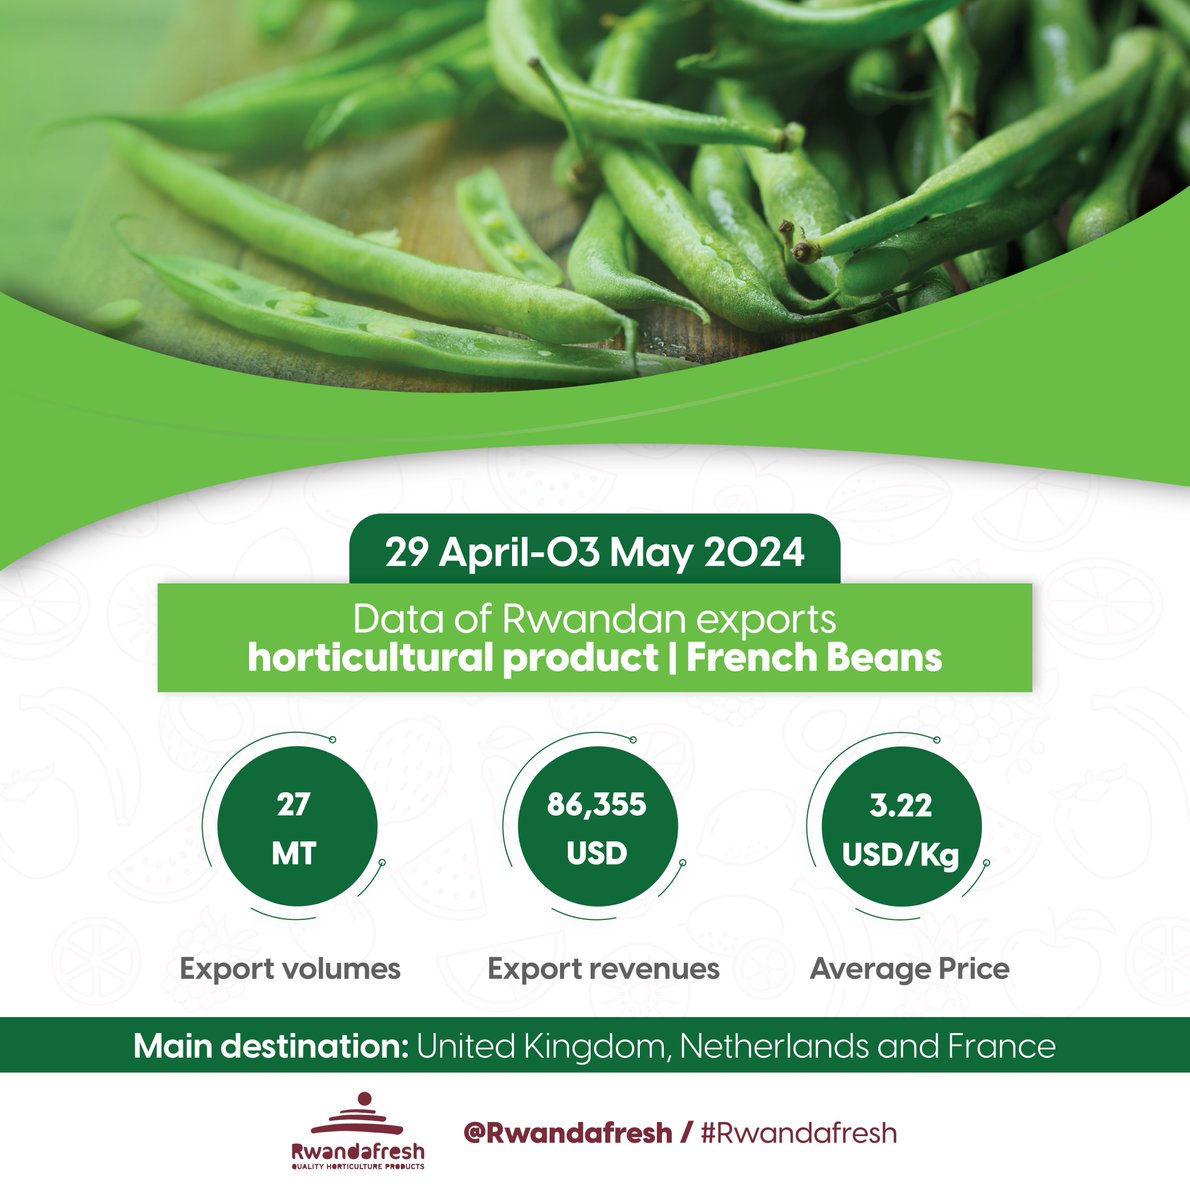 From nutritious fruits, legumes and vegetables to vibrant blossoms, Rwanda's horticultural exports recorded a rise. Explore the data below showcasing last week's (April 29th April - 3rd May, 2024) exports in the sector... #RwandaAgriExports